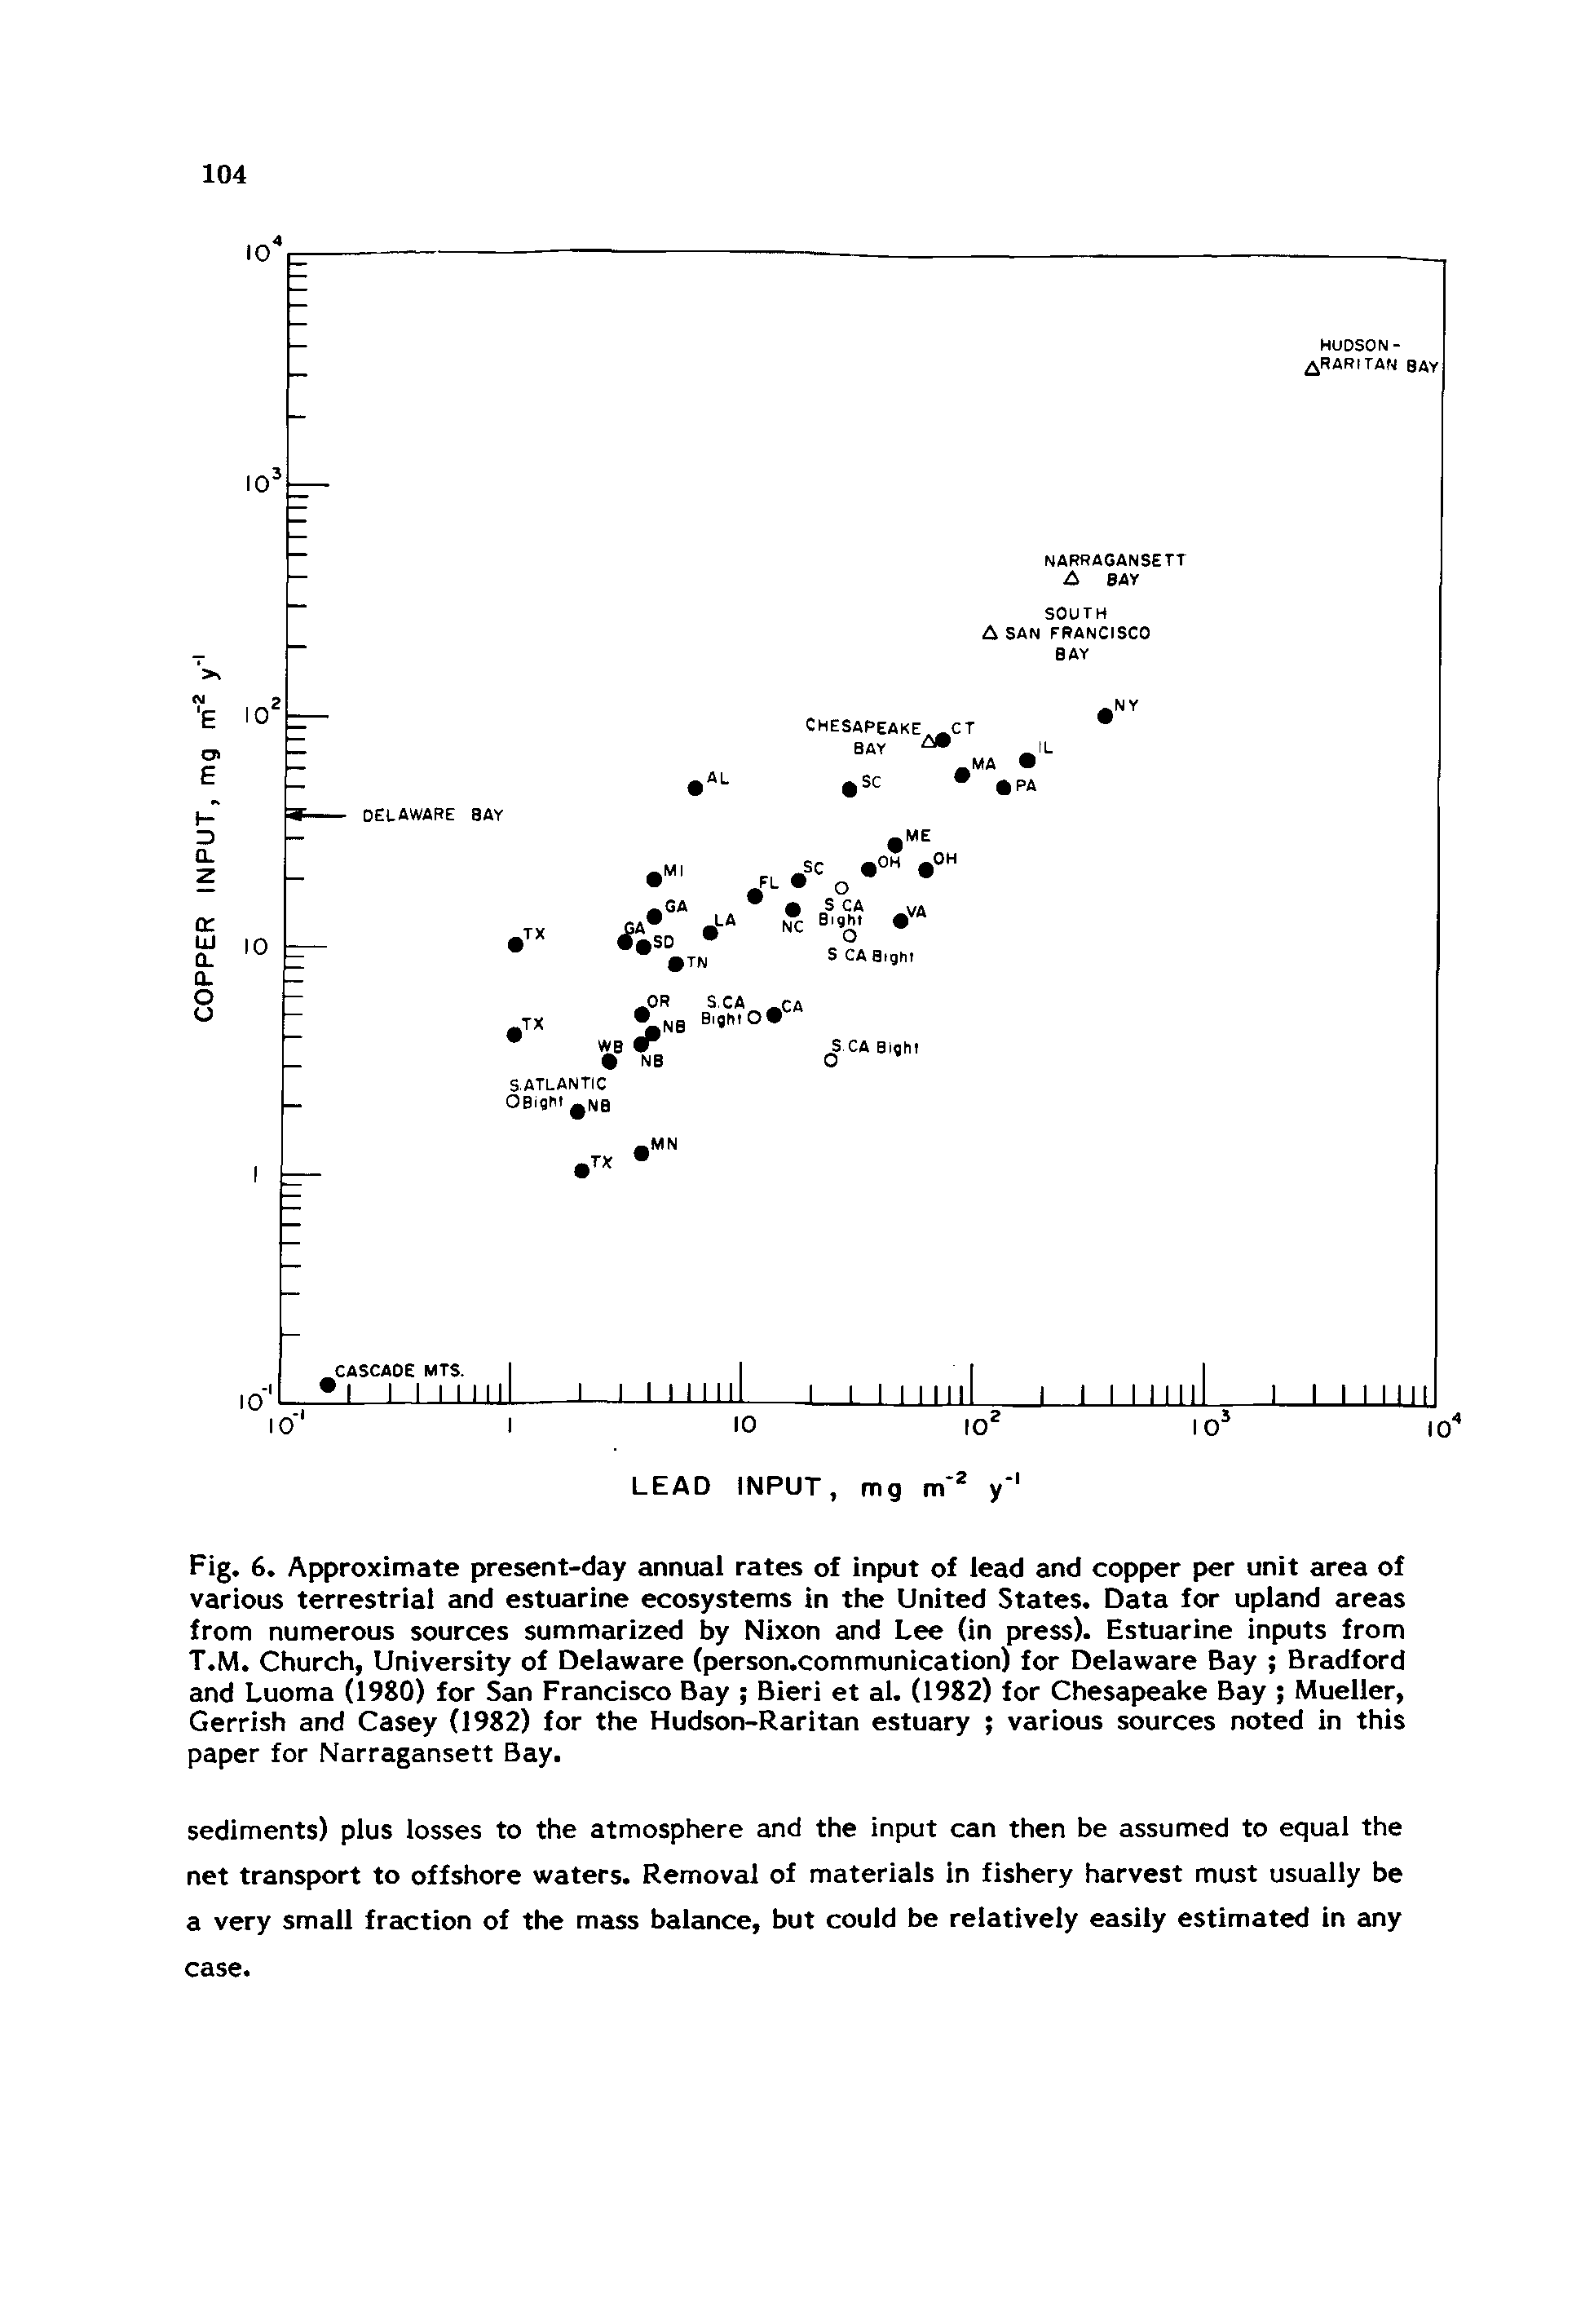 Fig. 6. Approximate present-day annual rates of input of lead and copper per unit area of various terrestrial and estuarine ecosystems in the United States. Data for upland areas from numerous sources summarized by Nixon and Lee (in press). Estuarine inputs from T.M. Church, University of Delaware (person.communication) for Delaware Bay Bradford and Luoma (19S0) for San Francisco Bay Bieri et al. (1982) for Chesapeake Bay Mueller, Gerrish and Casey (1982) for the Hudson-Raritan estuary various sources noted in this paper for Narragansett Bay.